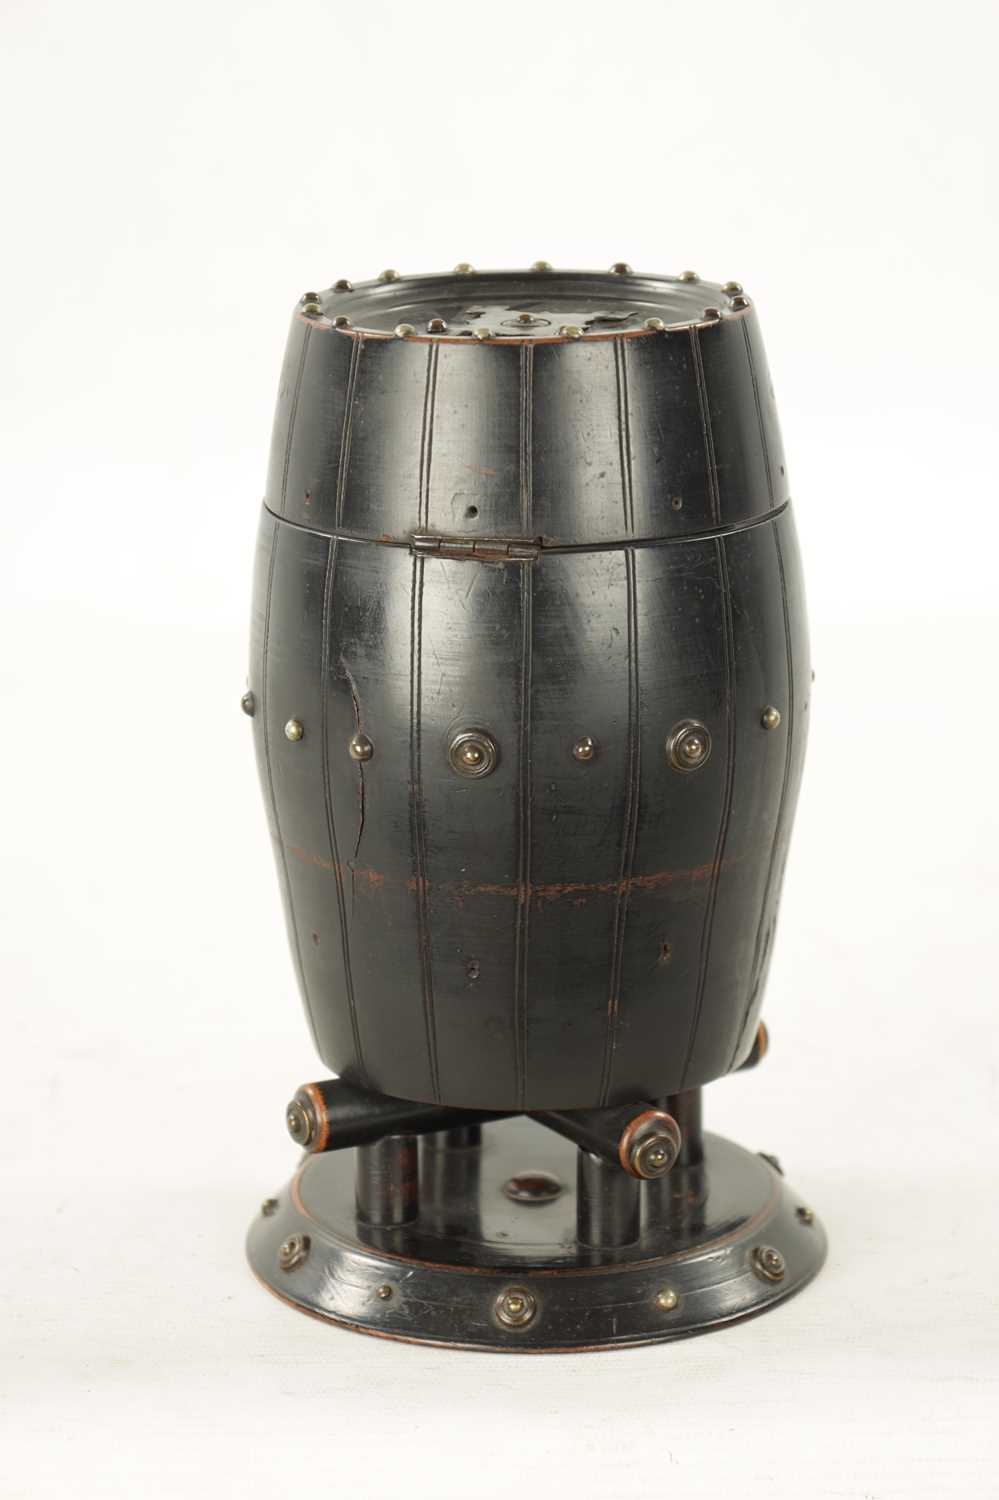 A 19TH CENTURY EBONISED CARVED WOOD TEA CADDY IN THE FORM OF A BARREL - Image 6 of 7